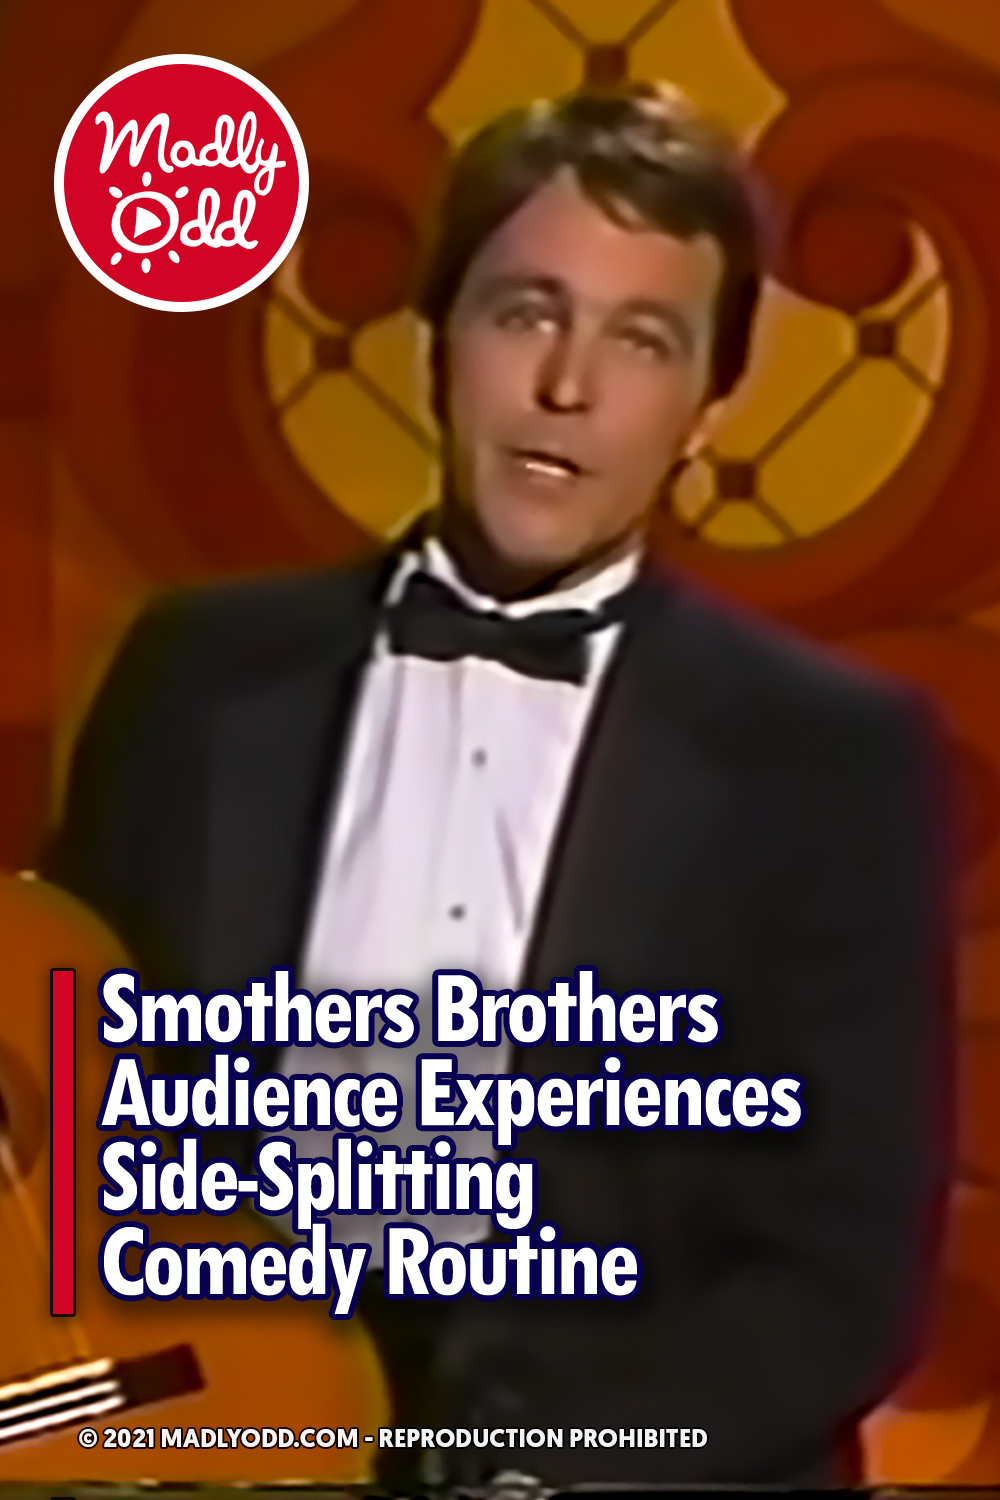 Smothers Brothers Audience Experiences Side-Splitting Comedy Routine